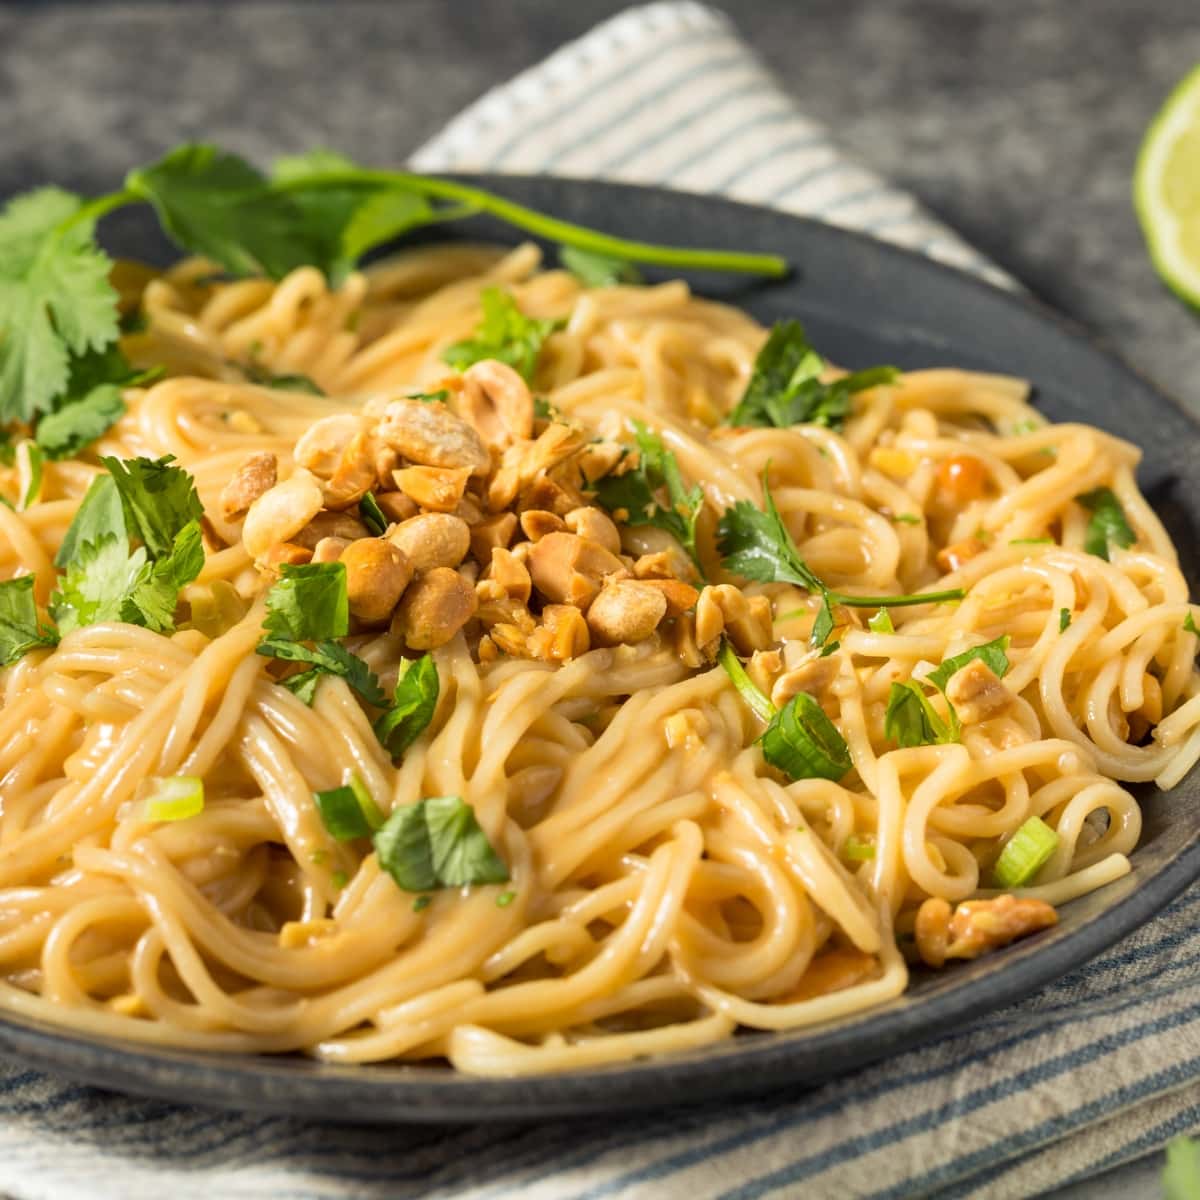 Peanut noodles garnished with fresh cilantro leaves and chopped noodles served on a black plate. 